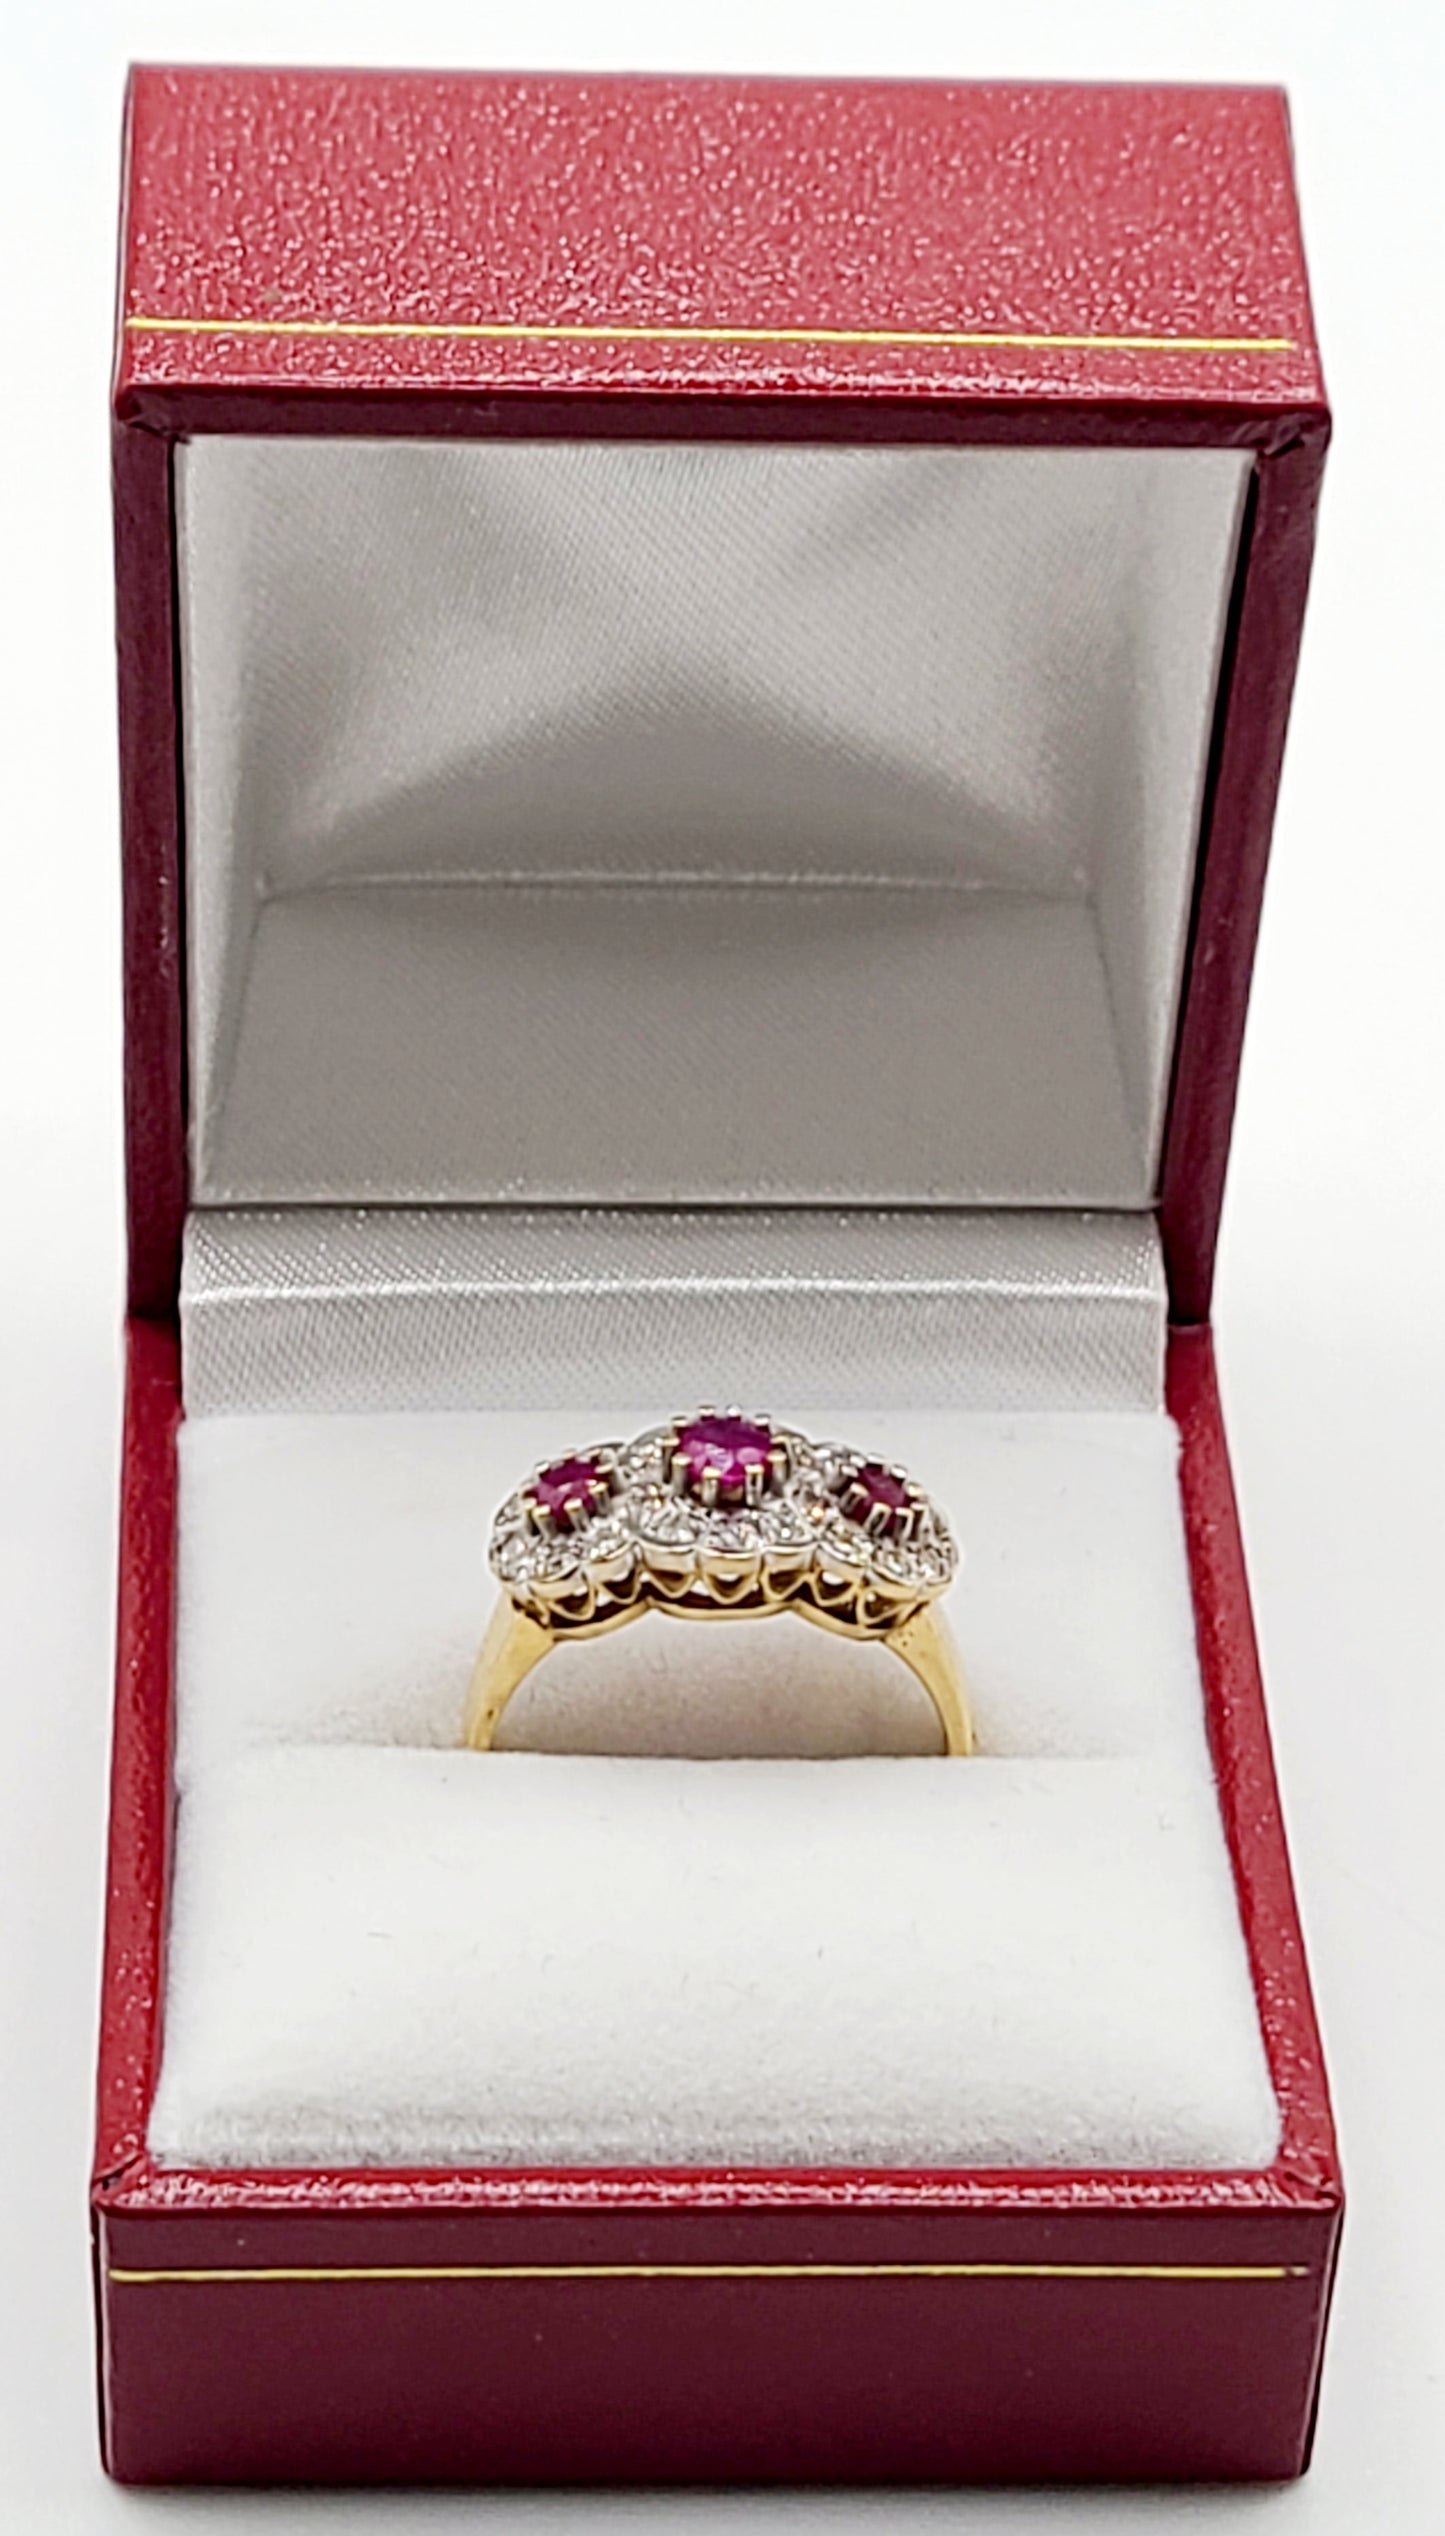 Ruby & Diamond Trilogy Ring on 18ct Gold band